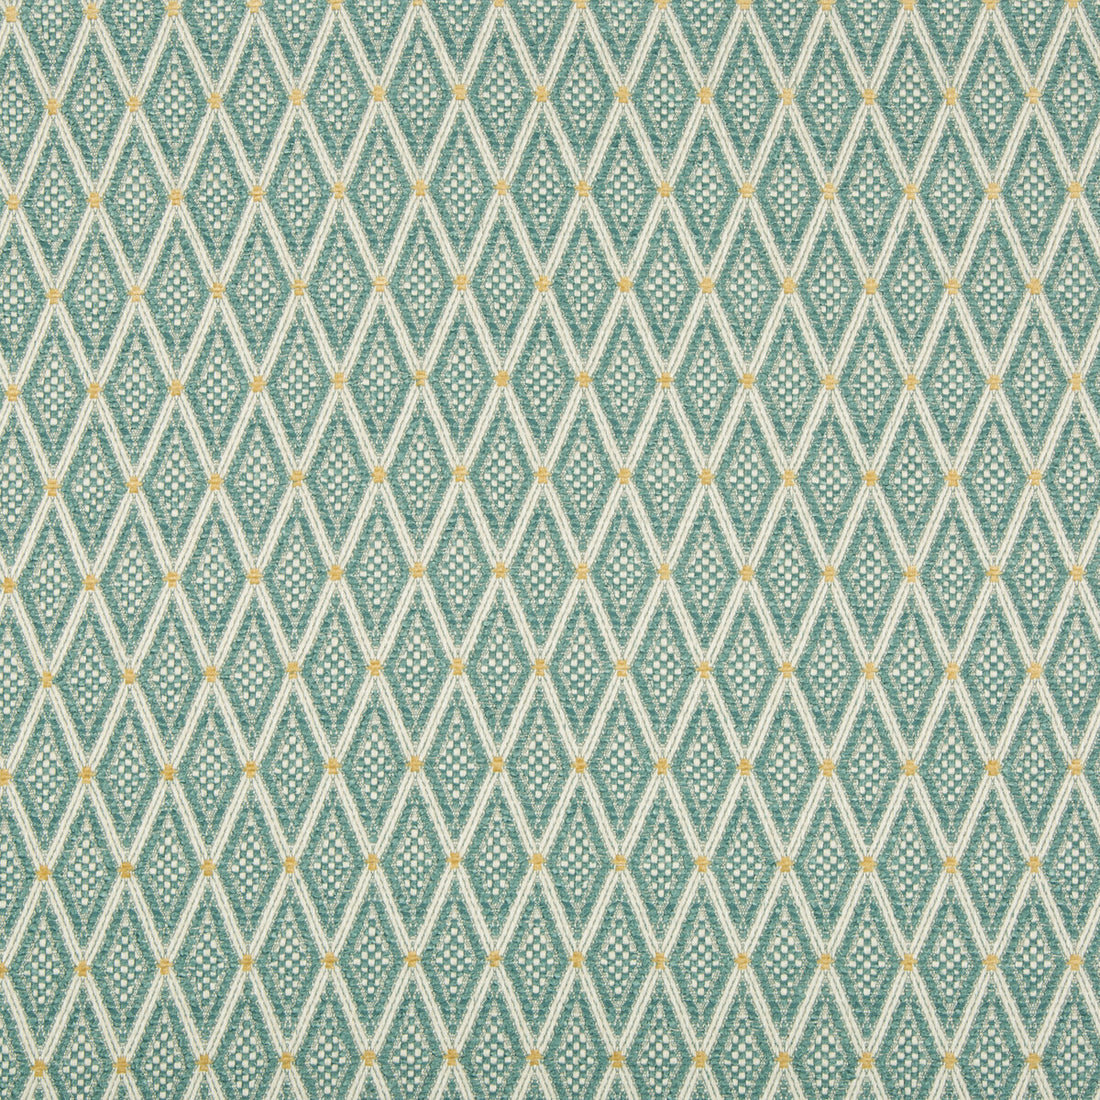 Kravet Design fabric in 34699-35 color - pattern 34699.35.0 - by Kravet Design in the Crypton Home collection